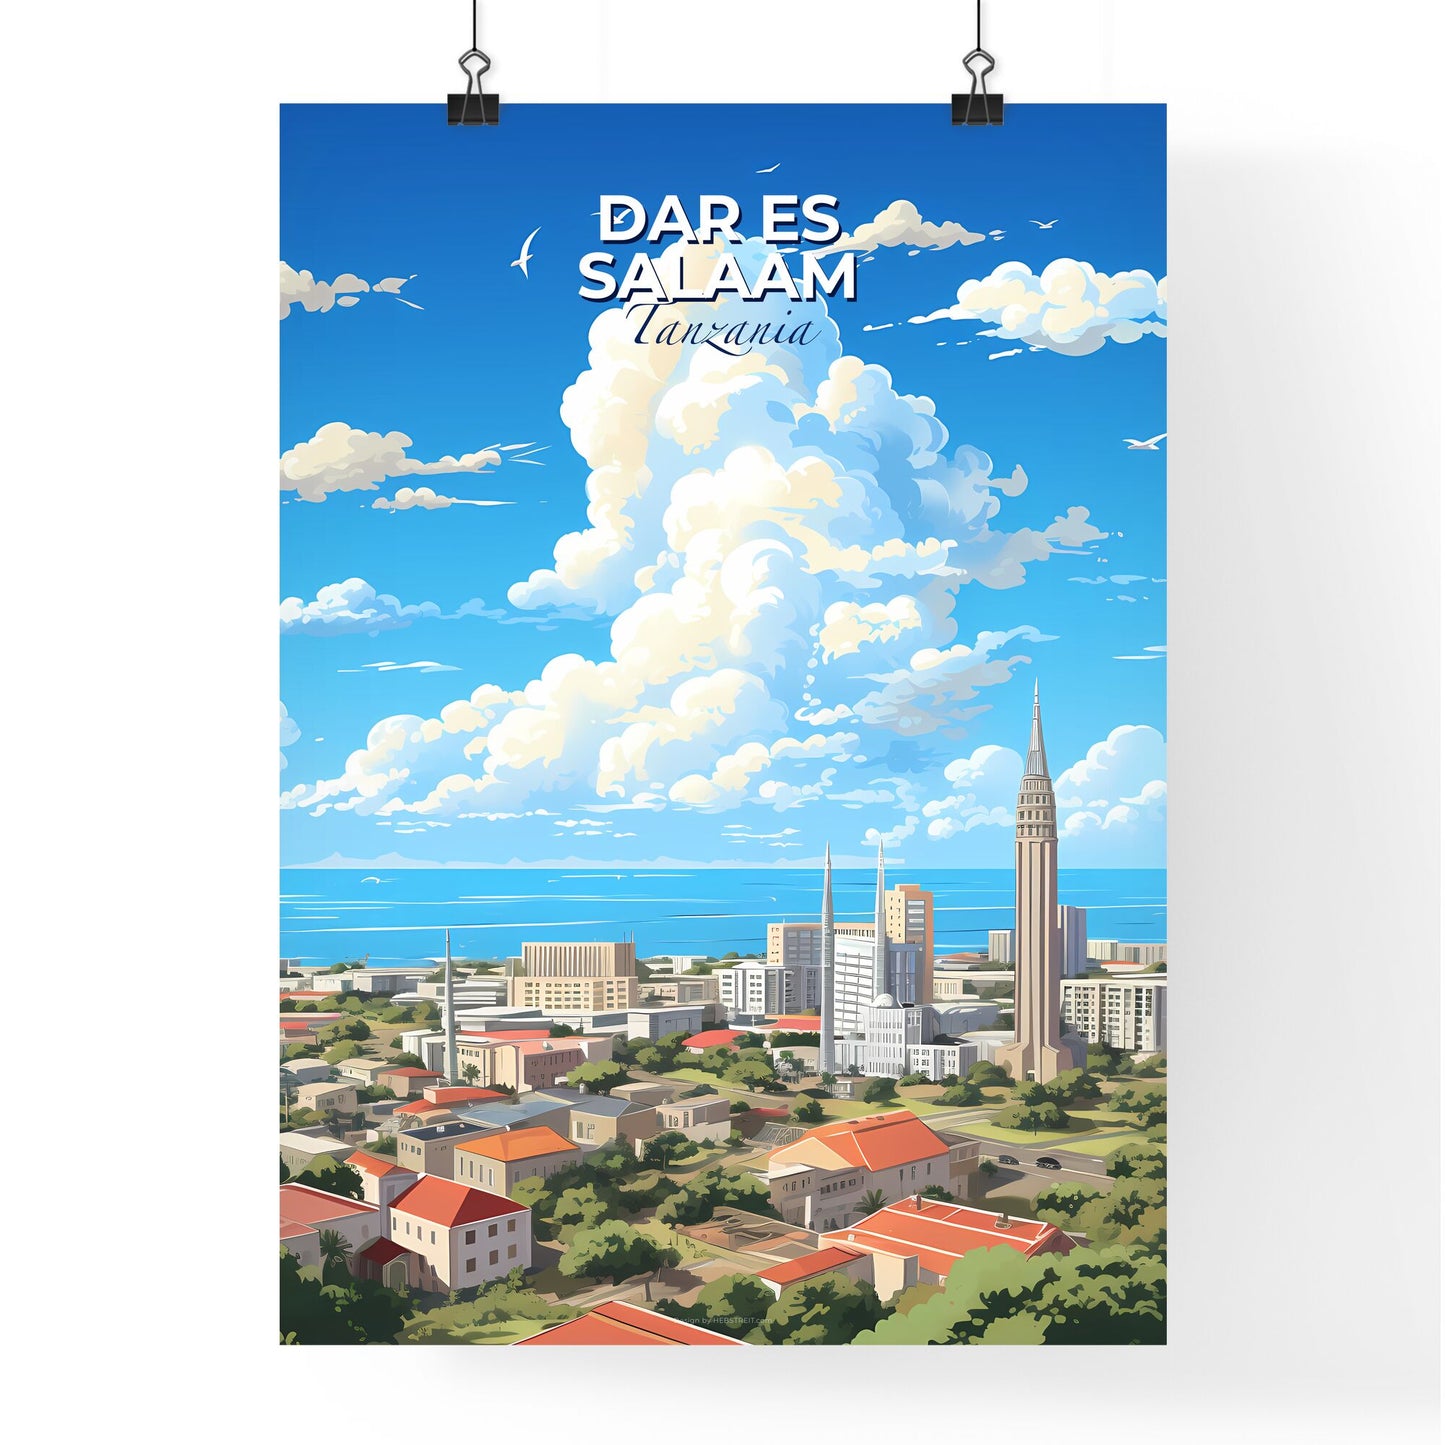 Dar es Salaam Tanzania Skyline - A City With Many Buildings And A Body Of Water - Customizable Travel Gift Default Title